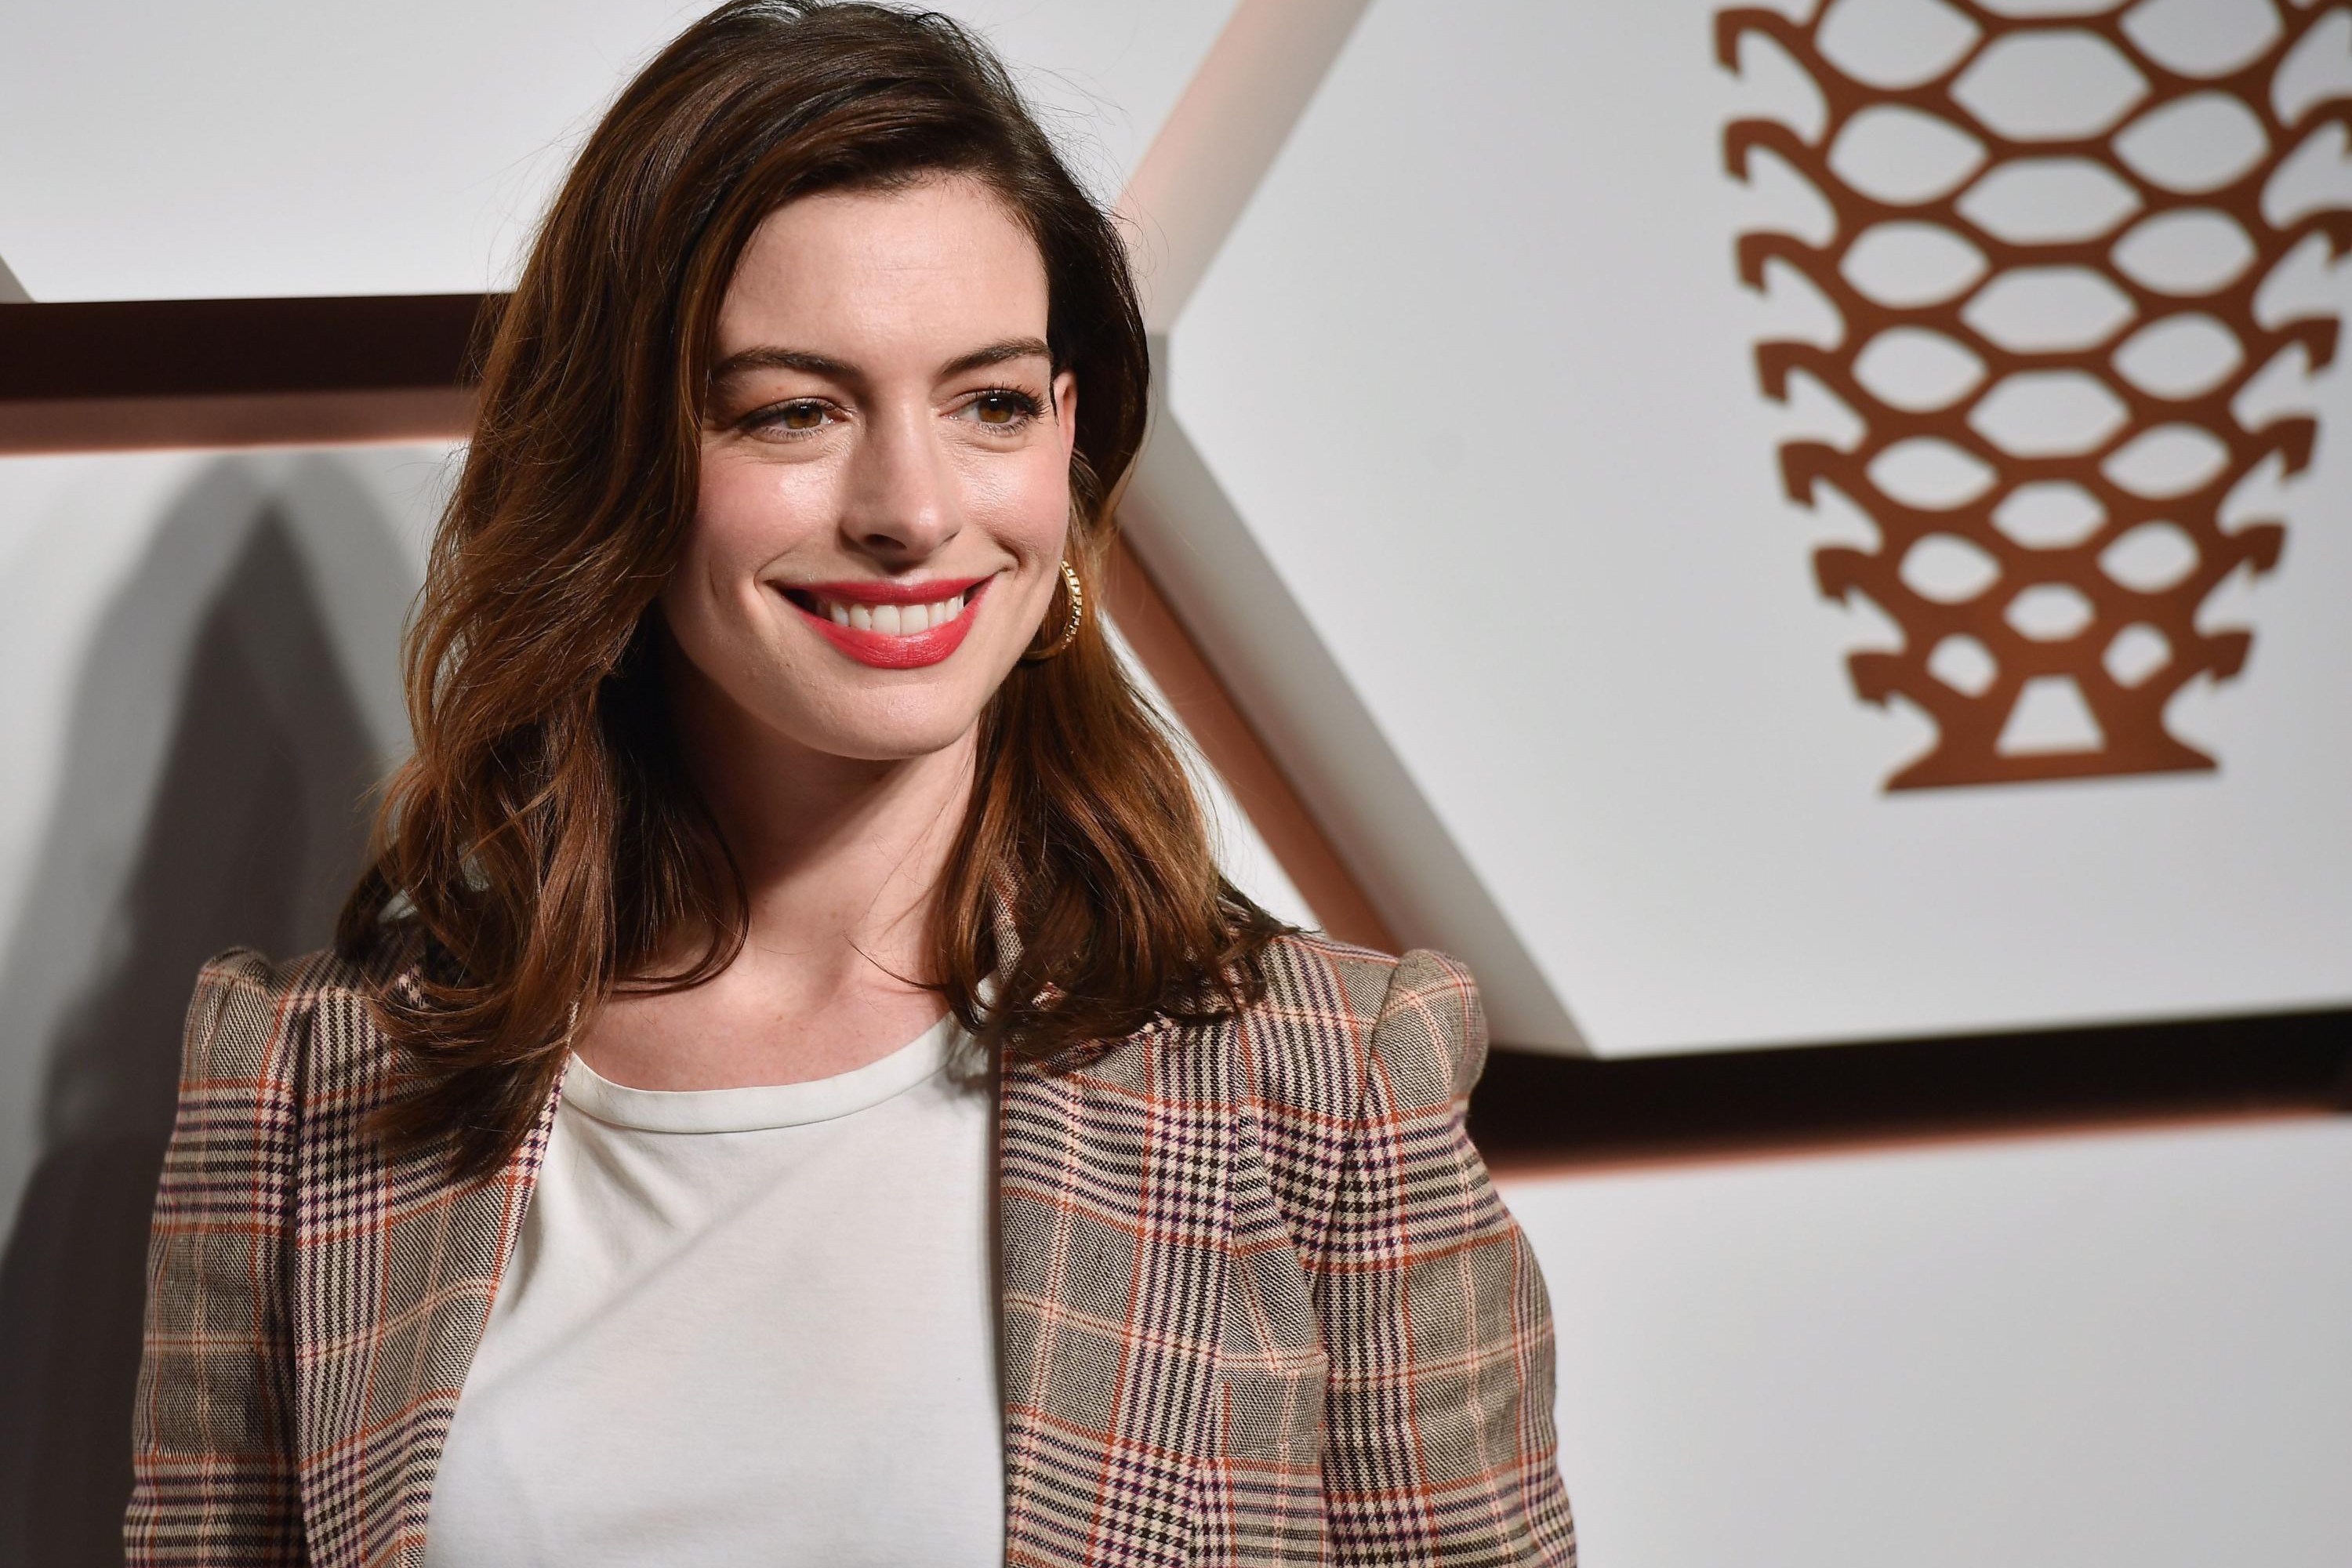 Actress American Anne Hathawa Anne Hathaway Brown Eyes Brunette Face Lipstick Smile 3000x2000